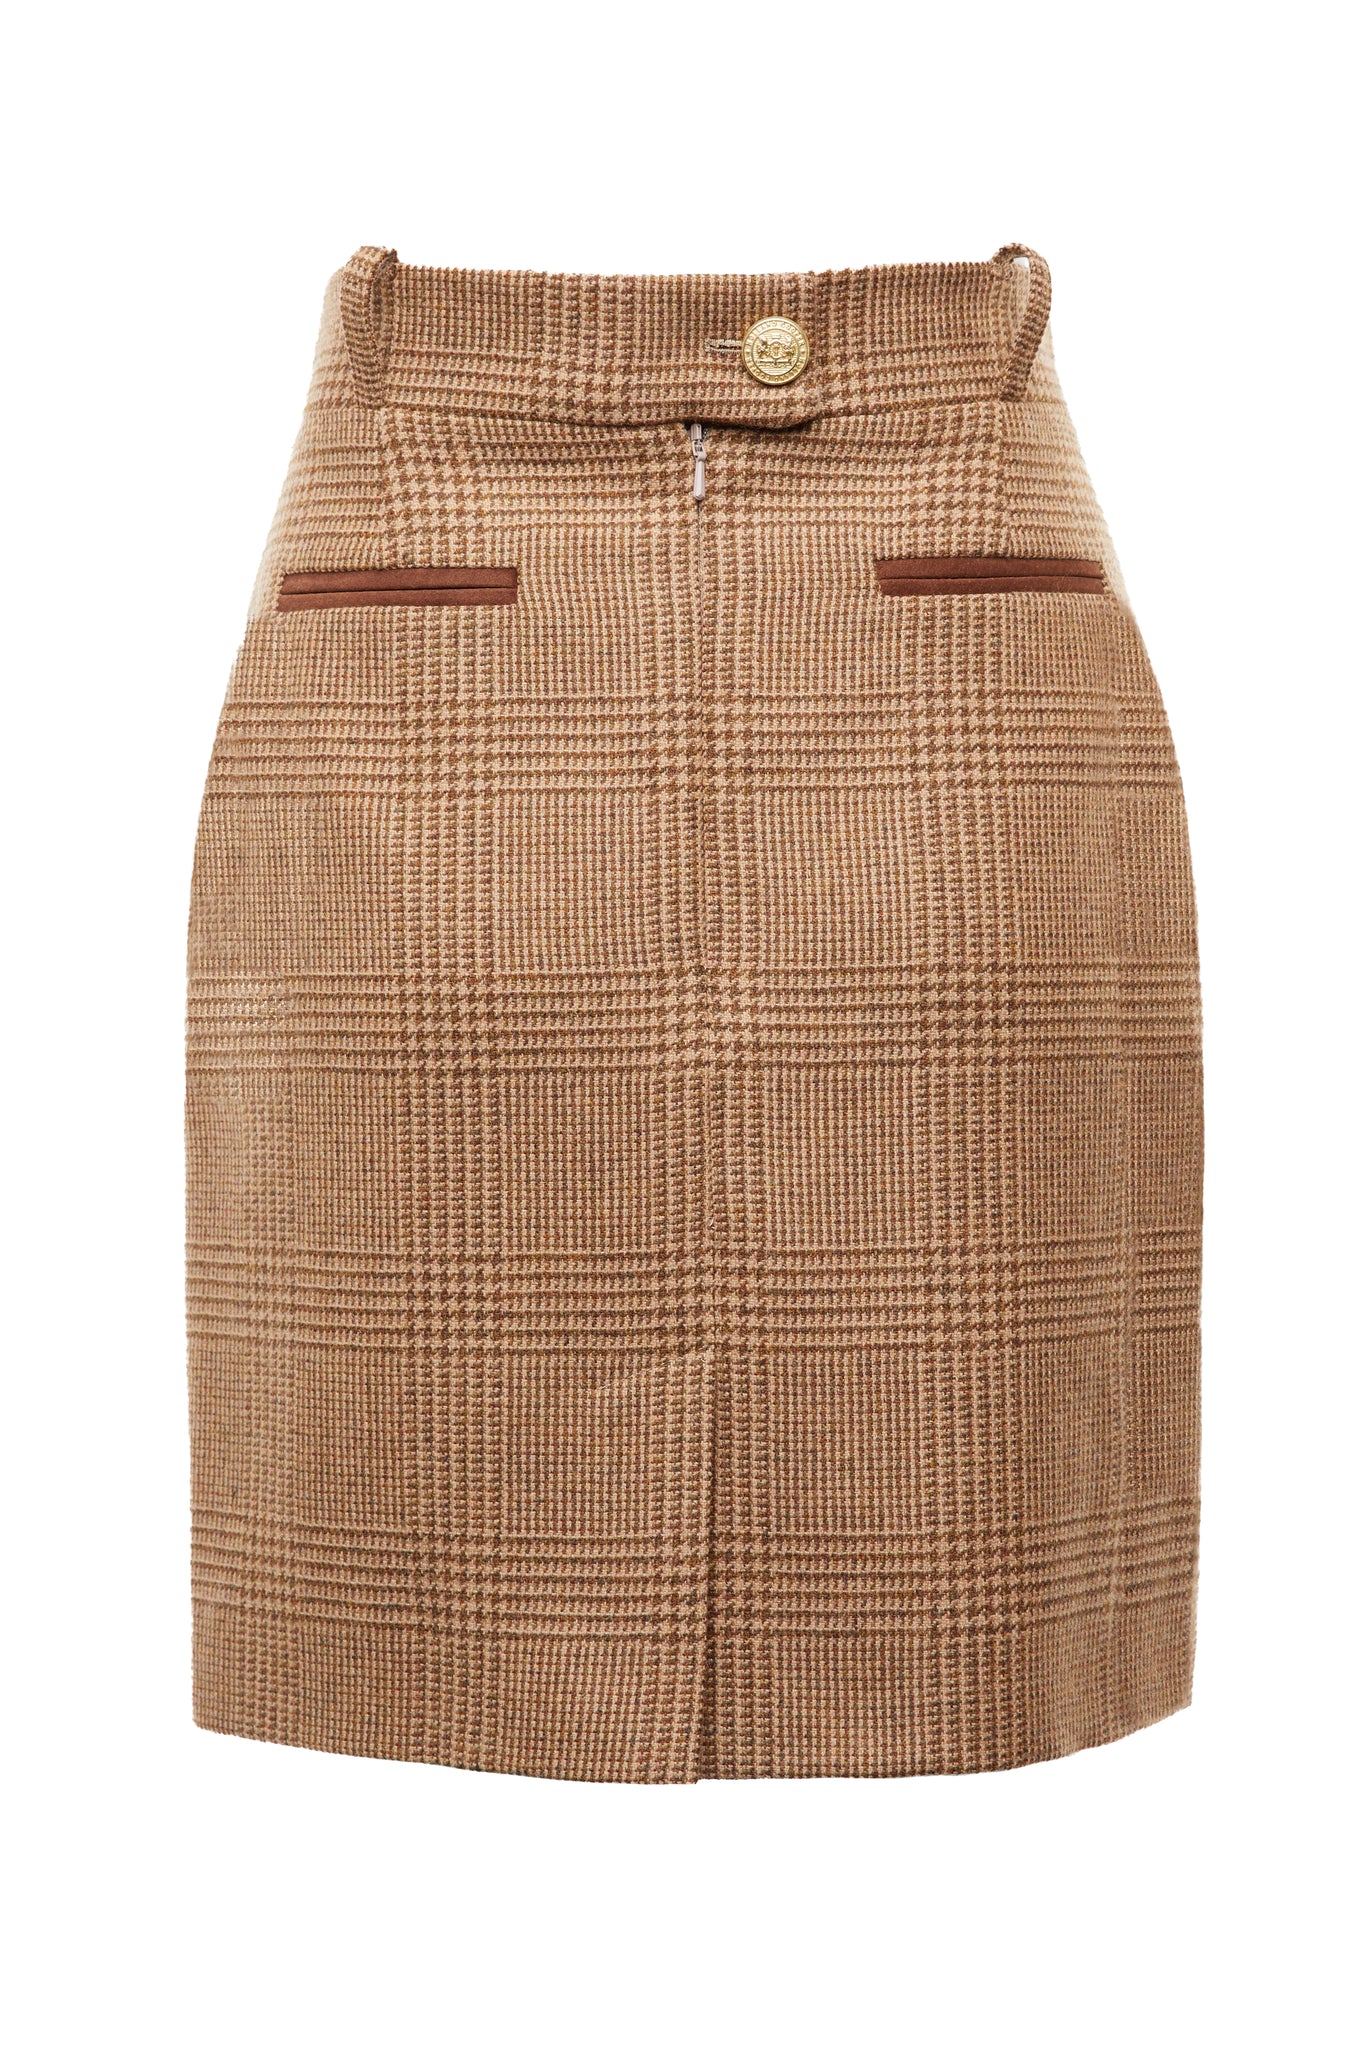 back of womens light brown check wool pencil mini skirt with concealed zip fastening on centre back and gold rivets down front